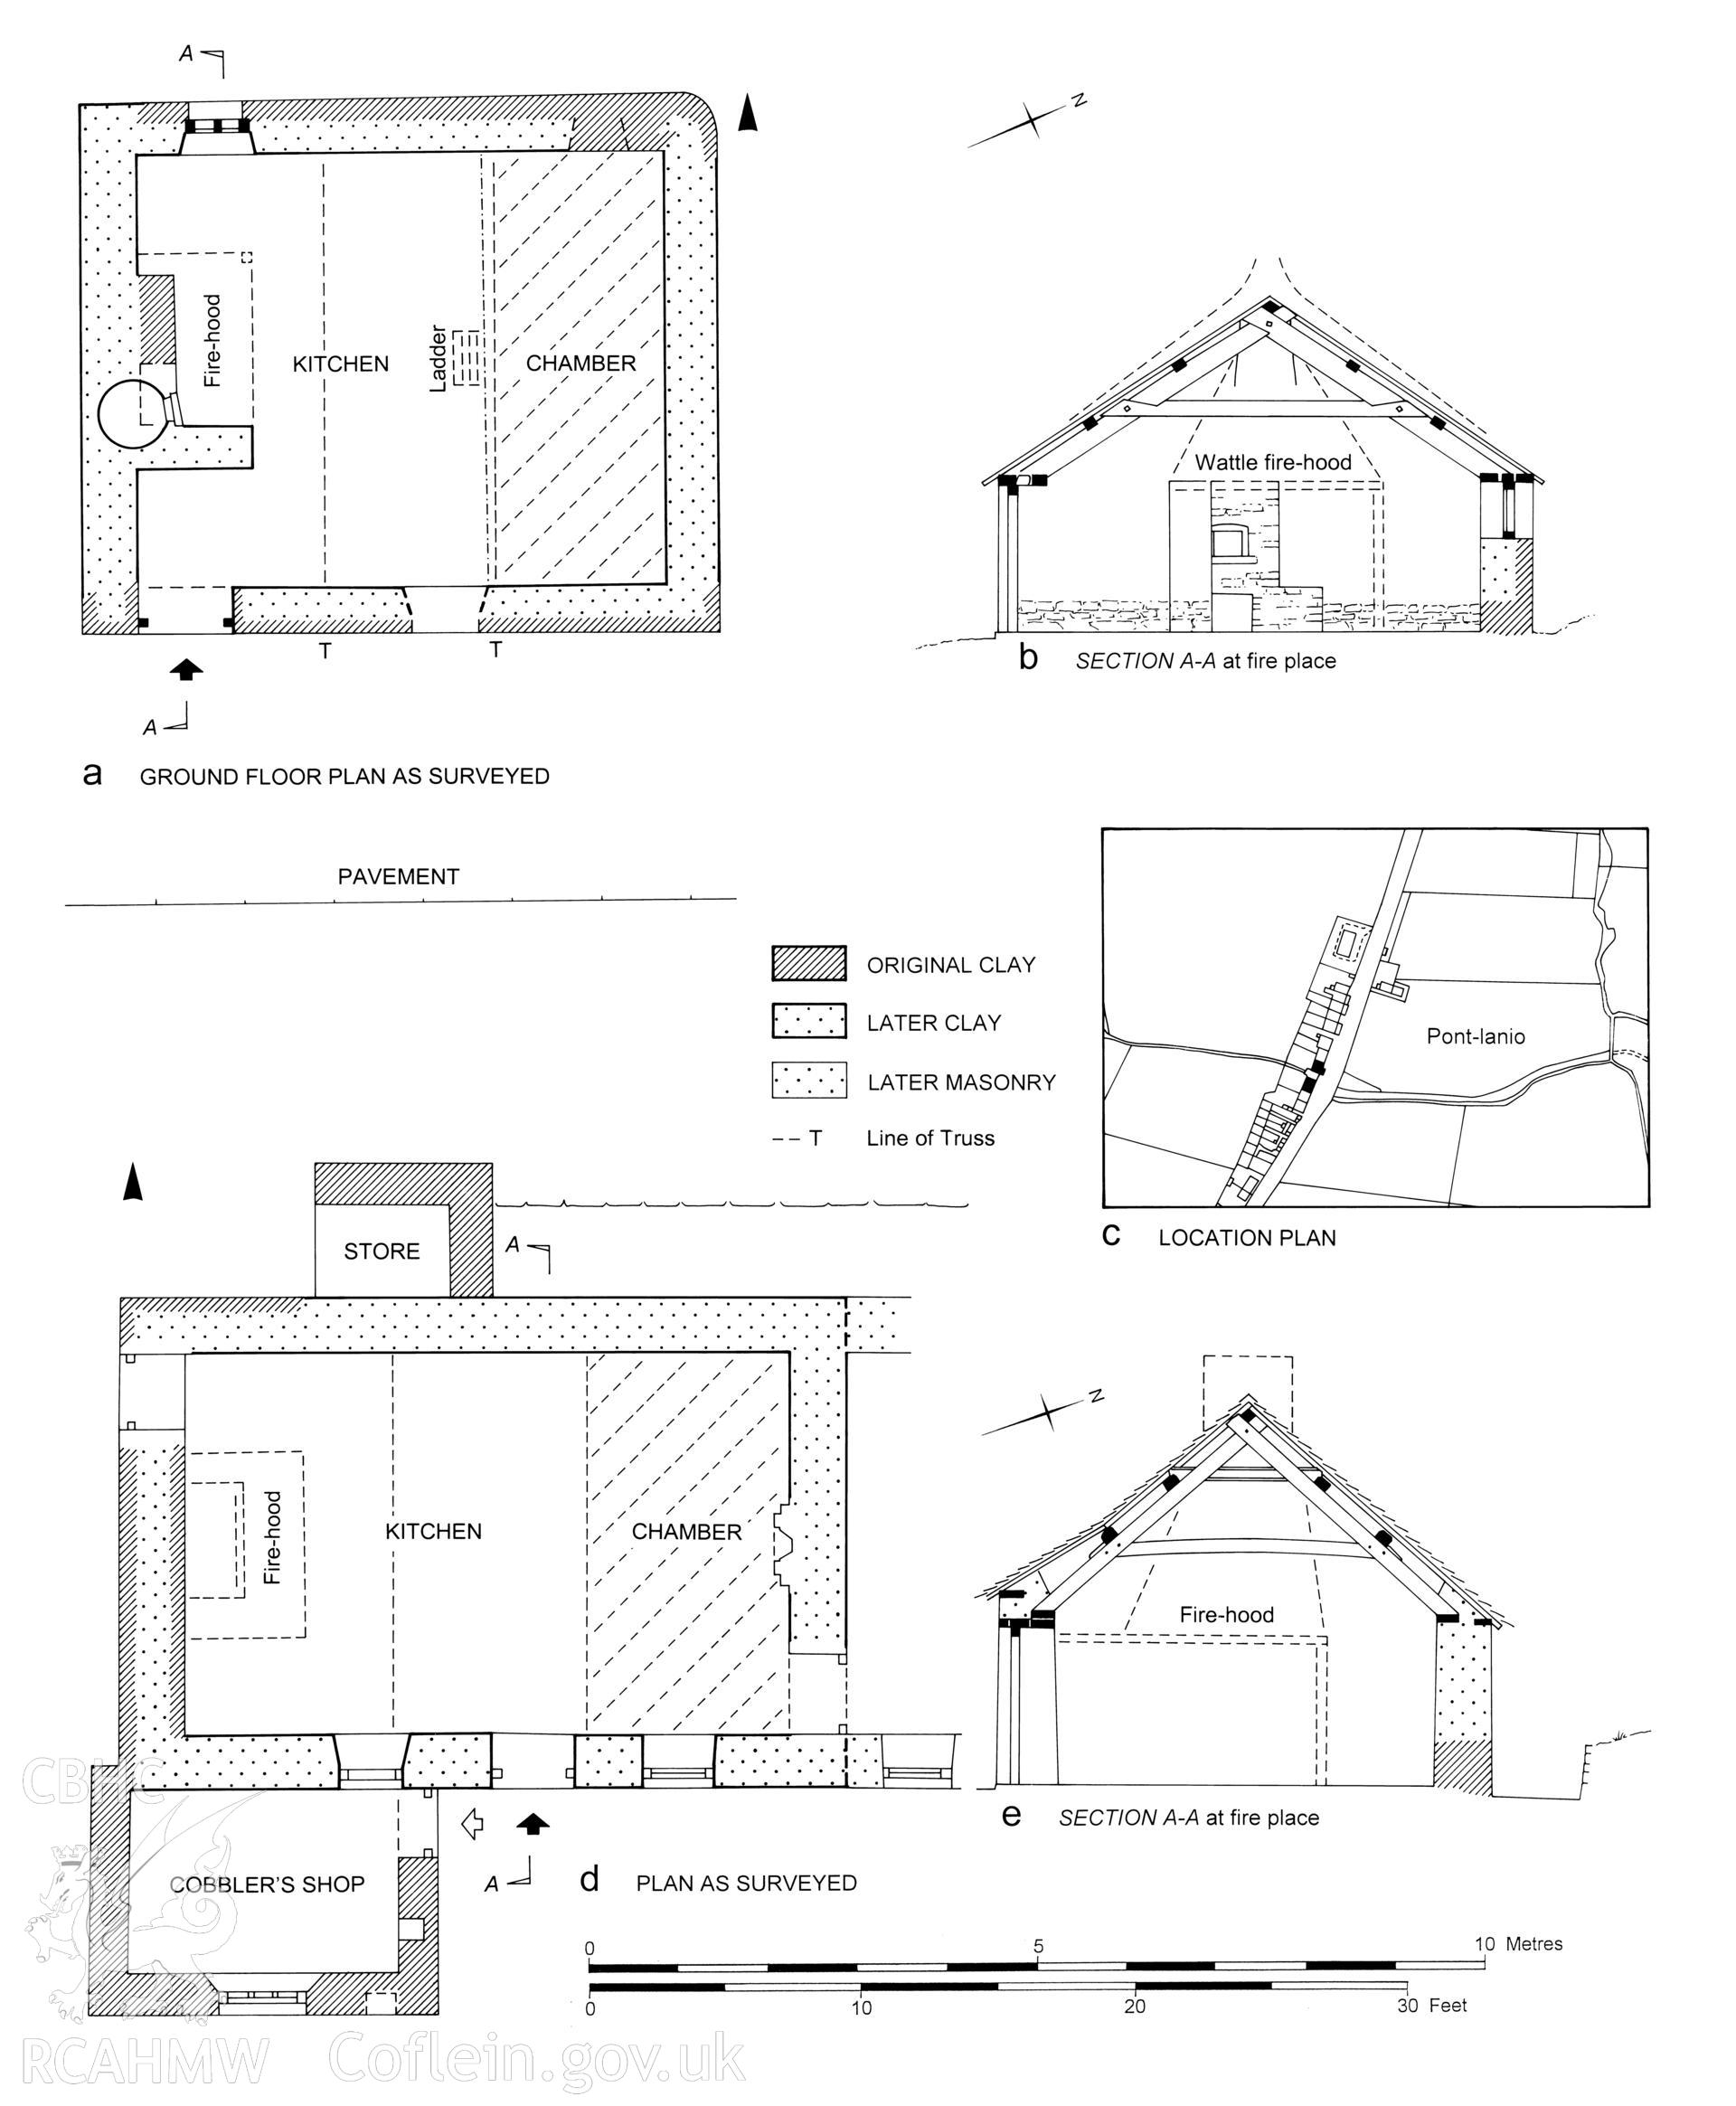 Gwynfa and Olwen House, Blaenplwyf; measured drawing showing plans, section views and location plan,  produced by C.W. Green, RCAHMW, 2008